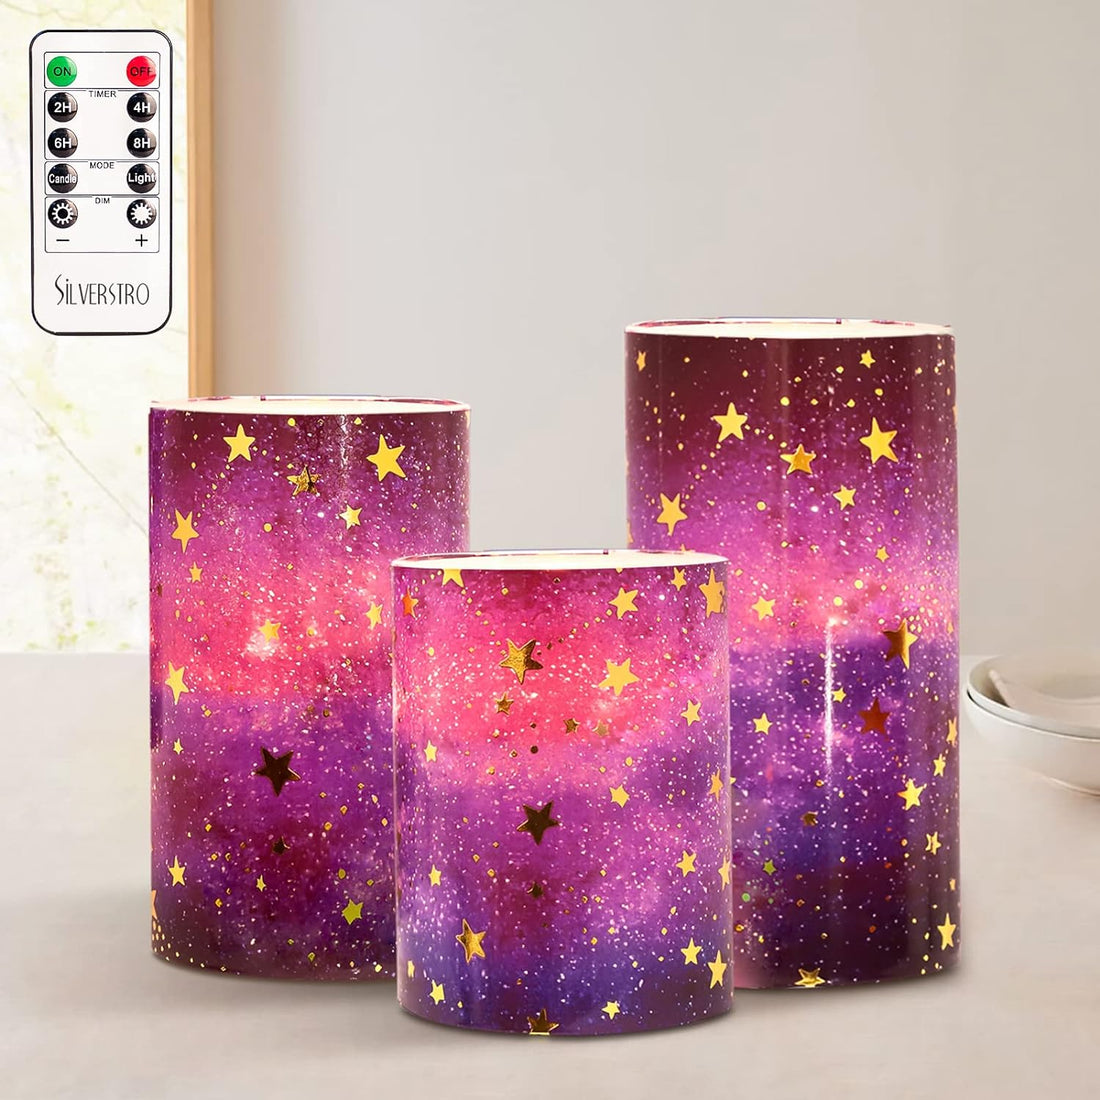 Silverstro Modern Style Star Flameless Candles Glass Flickering LED Candles with Remote - Home Party Wedding Romance Atmosphere Holiday Spring Valentines Decor - Set of 3